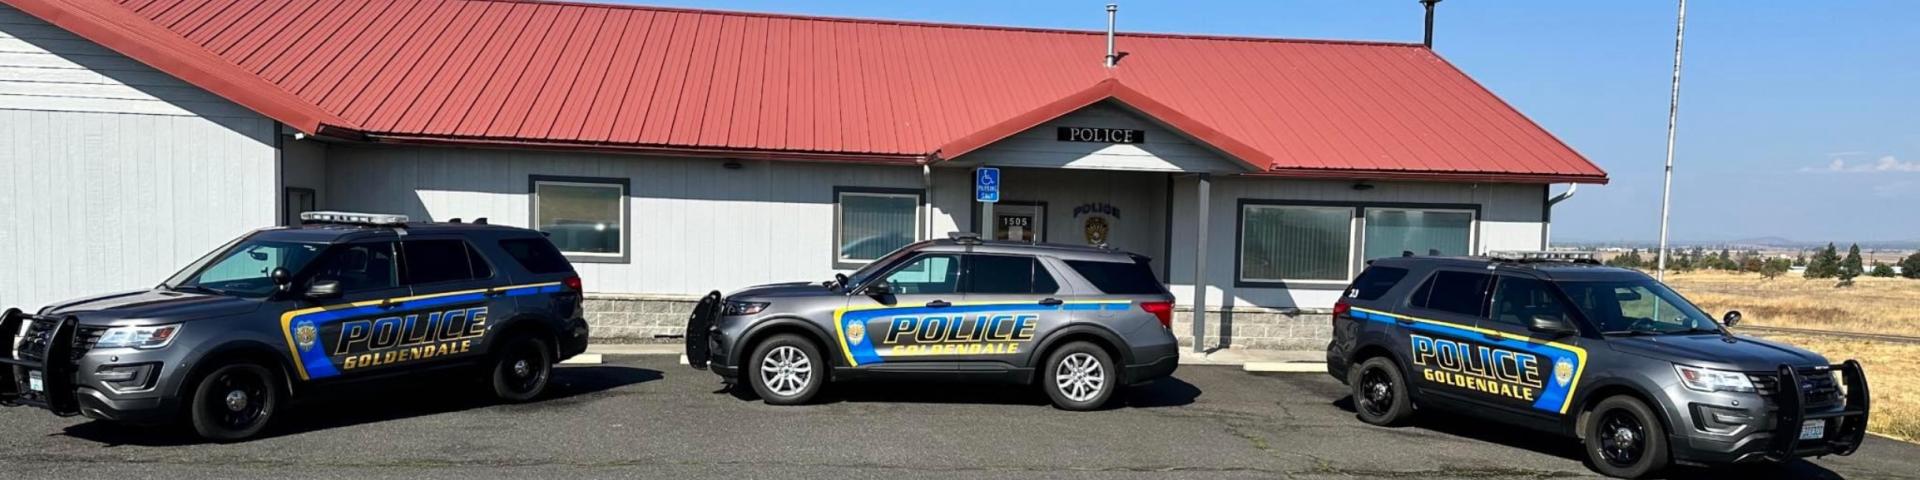 Goldendale Police Department